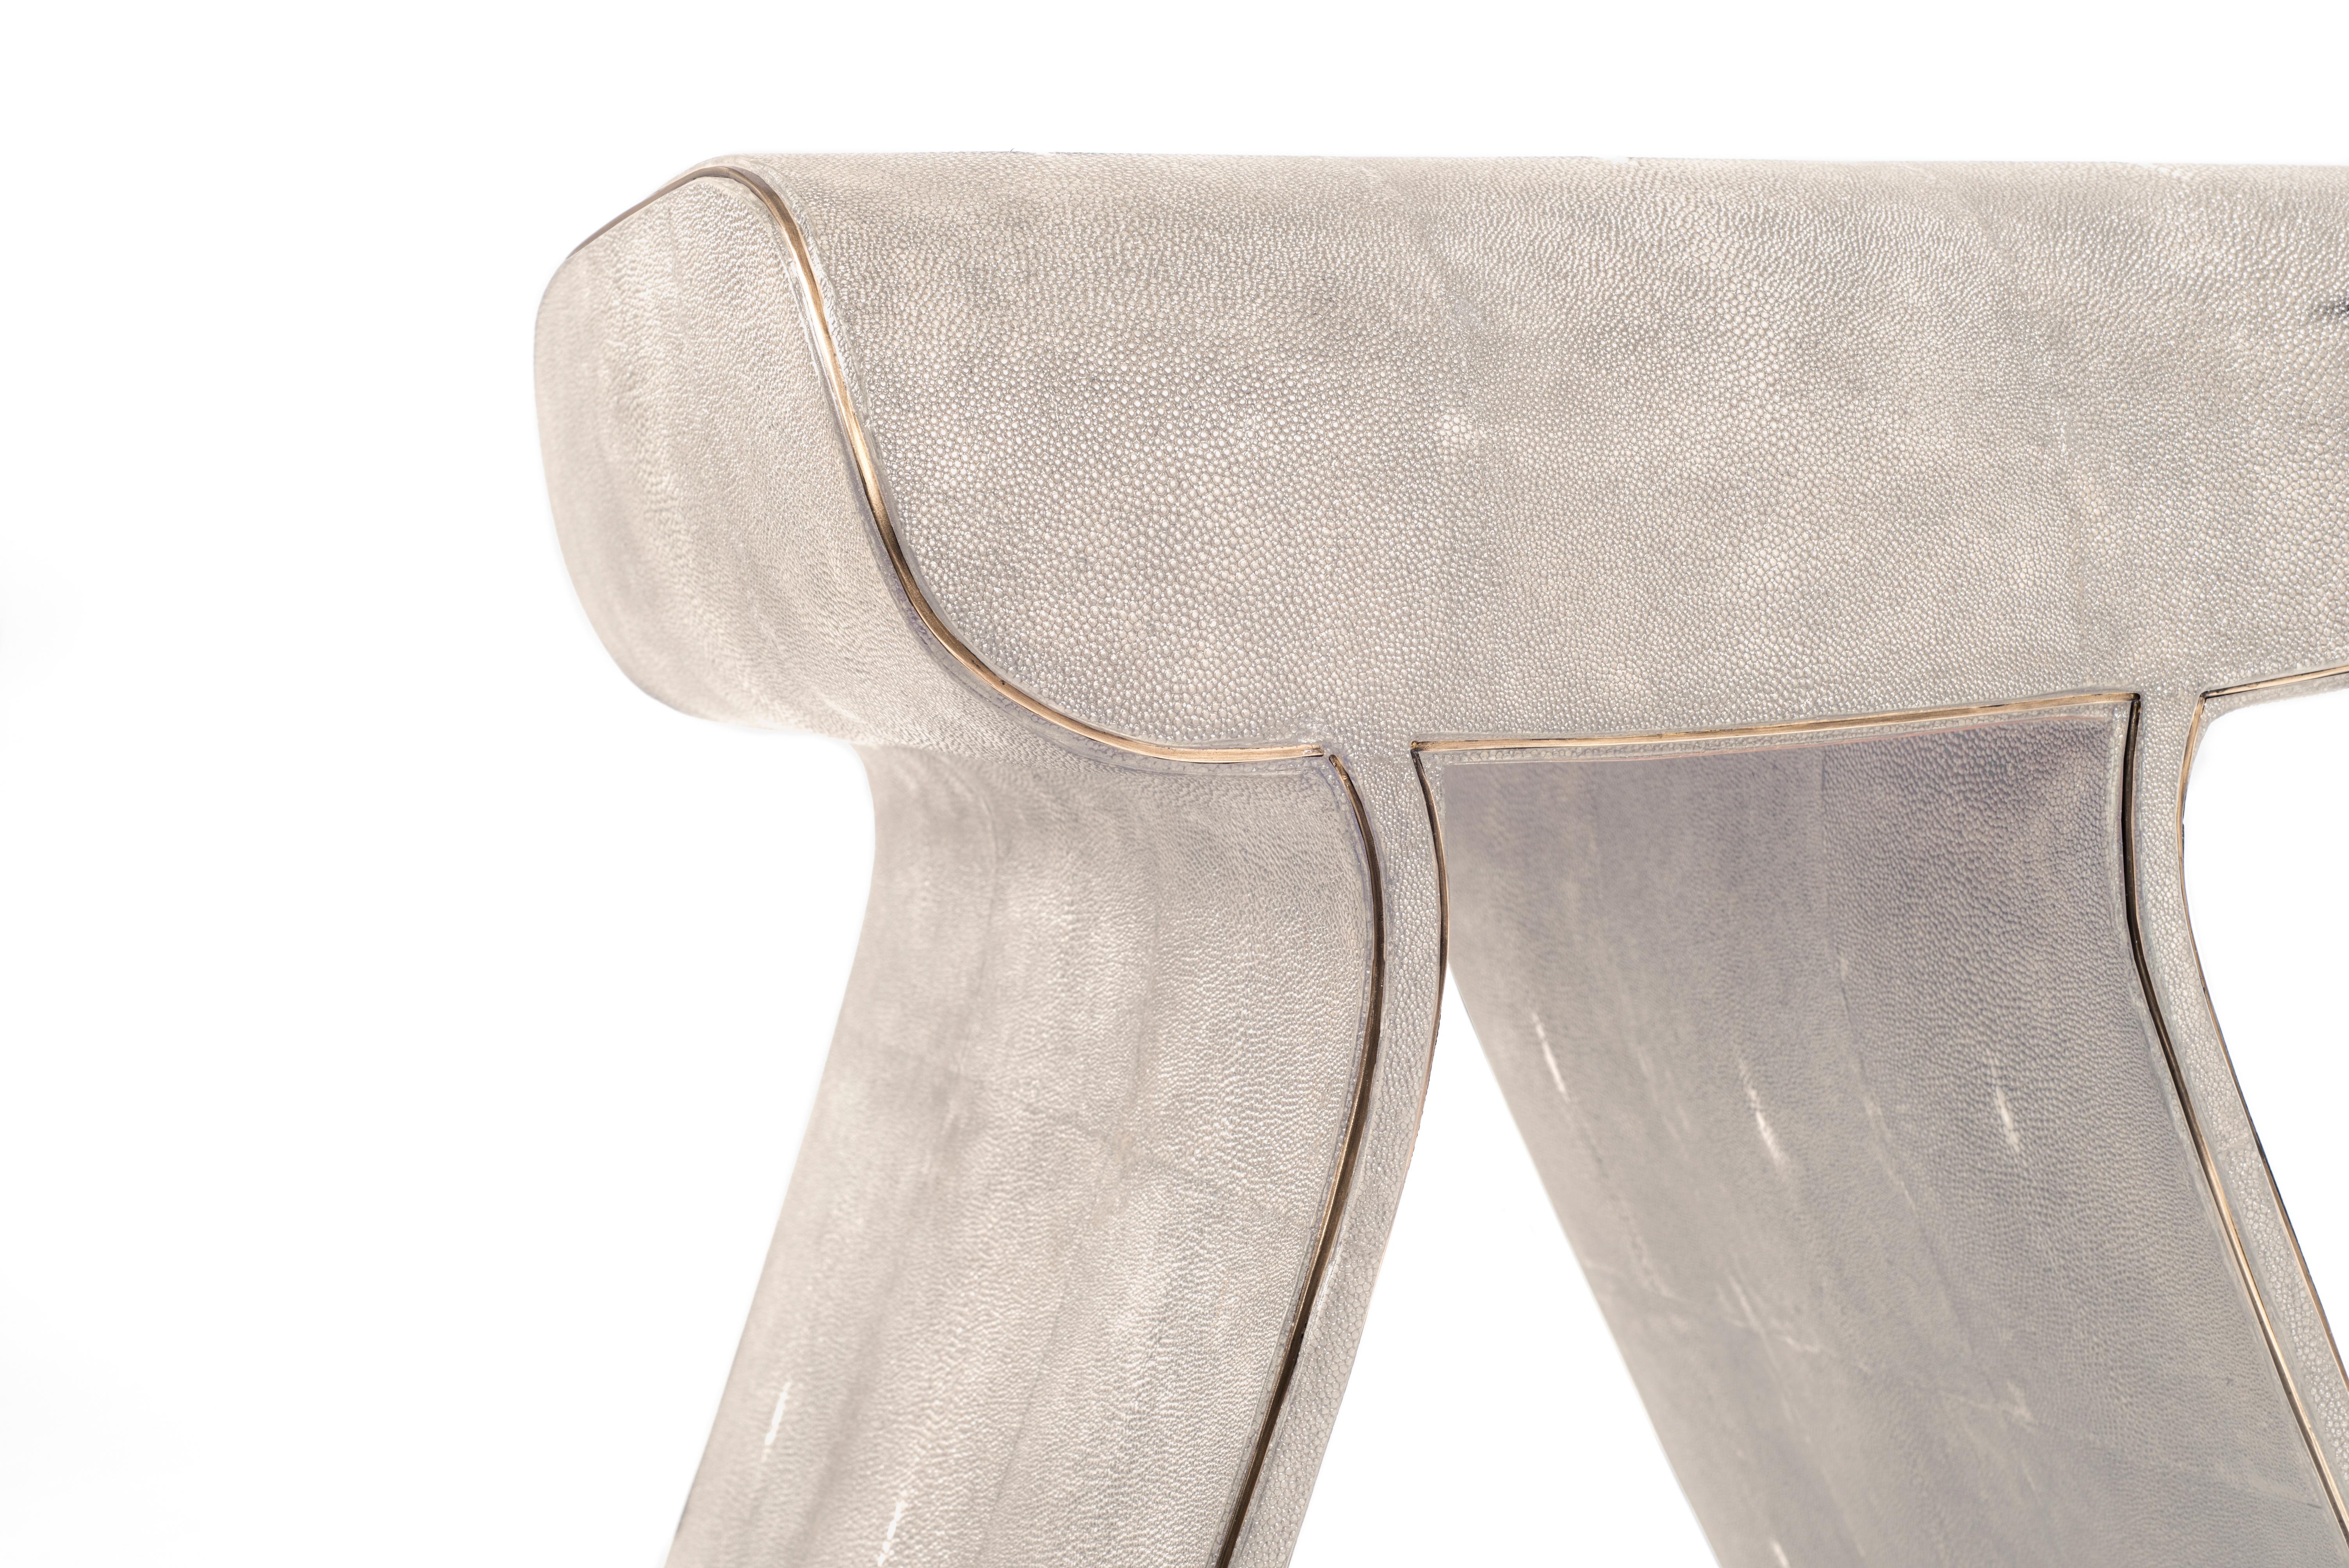 Art Deco Dandy Stool in Cream Shagreen with Bronze-Patina Brass Details by Kifu Paris For Sale